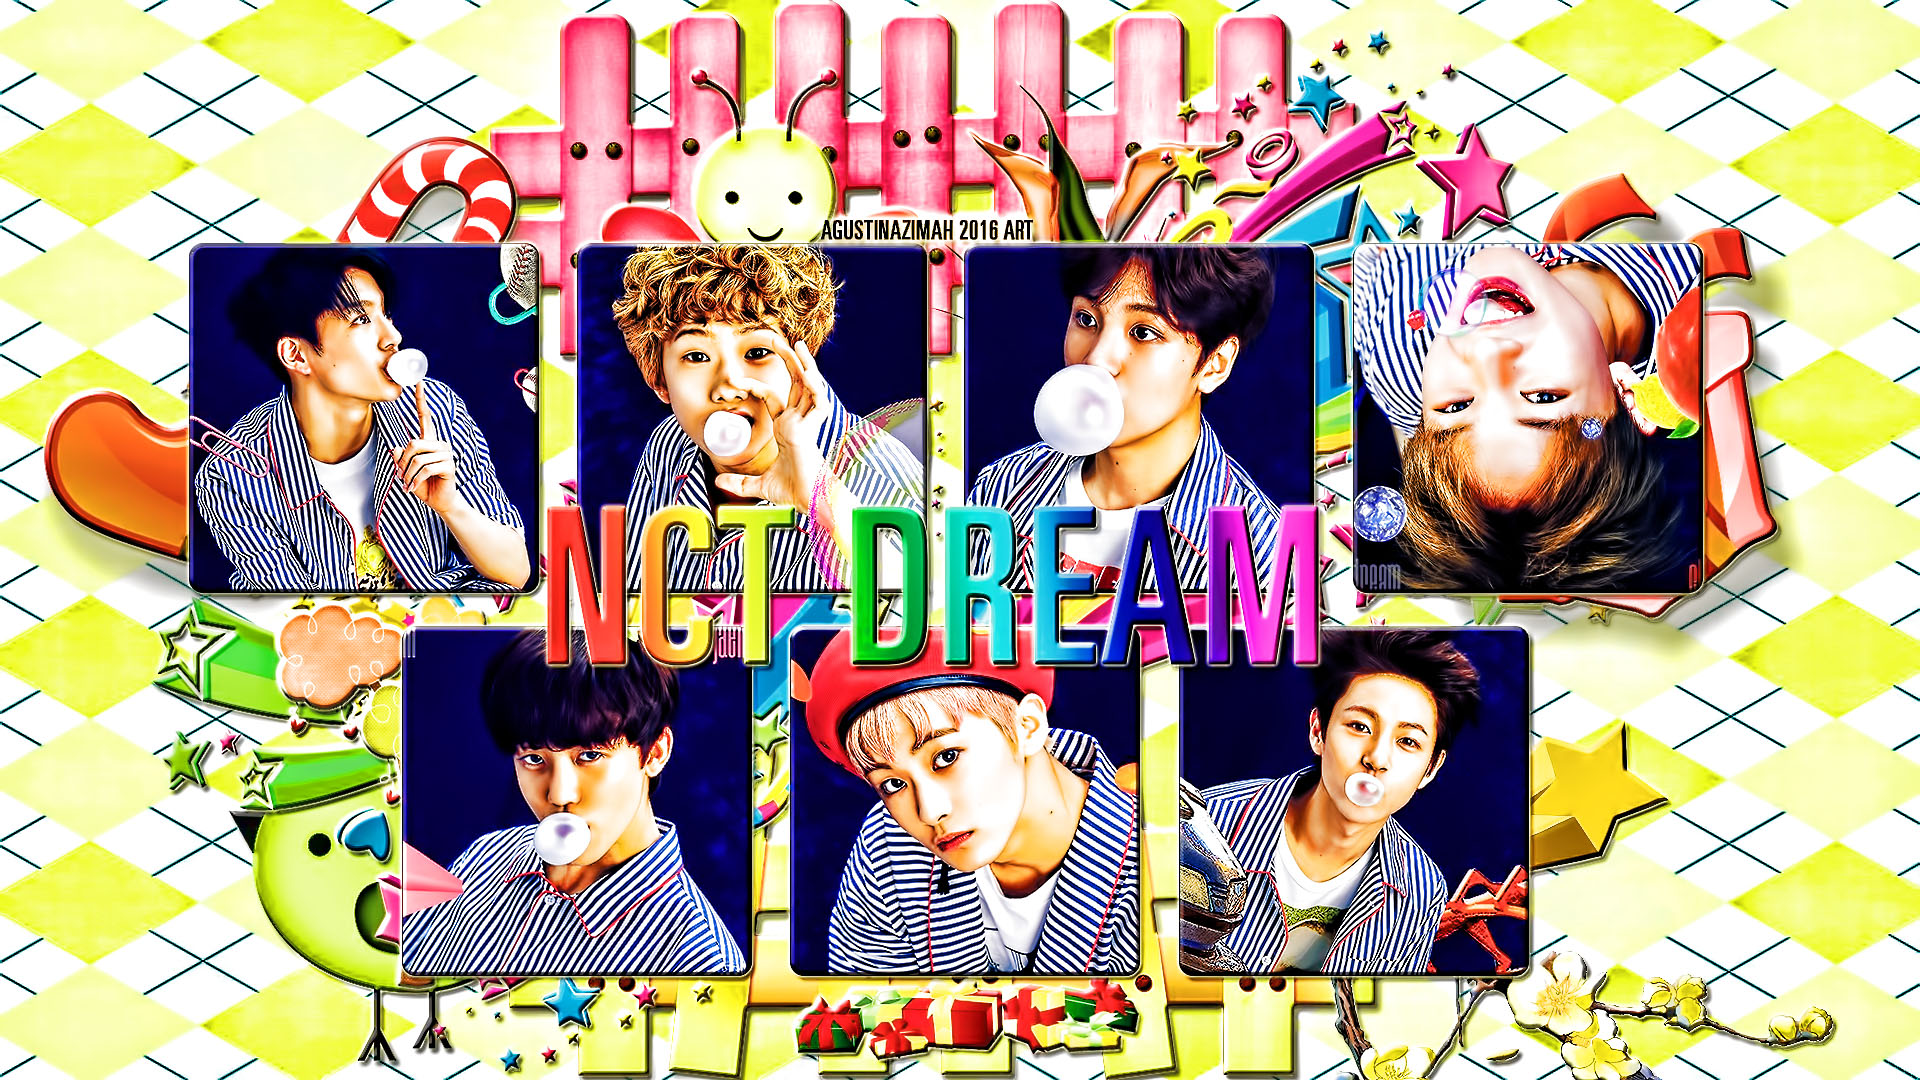 🔥 Download Artwork Nct Dream For Chewing Gum Agustinazimah by @mbowen ...